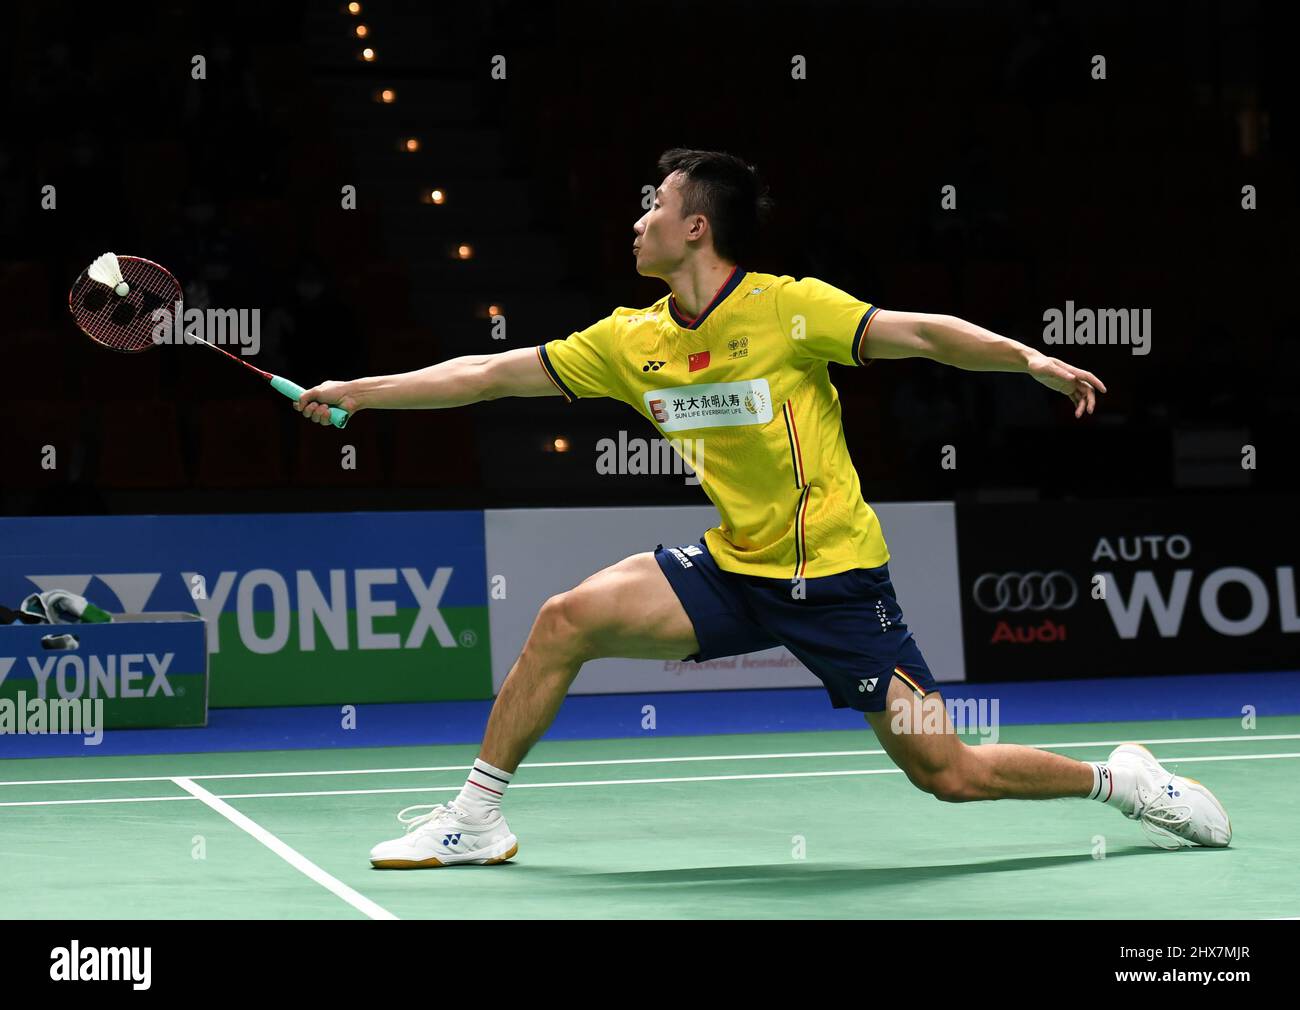 Lu Guangzu of China returns a shot to Loh Kean Yew of Singapore during the quarterfinal round of the mens single match in the Indonesia Masters badminton tournament at the Istora Stadium